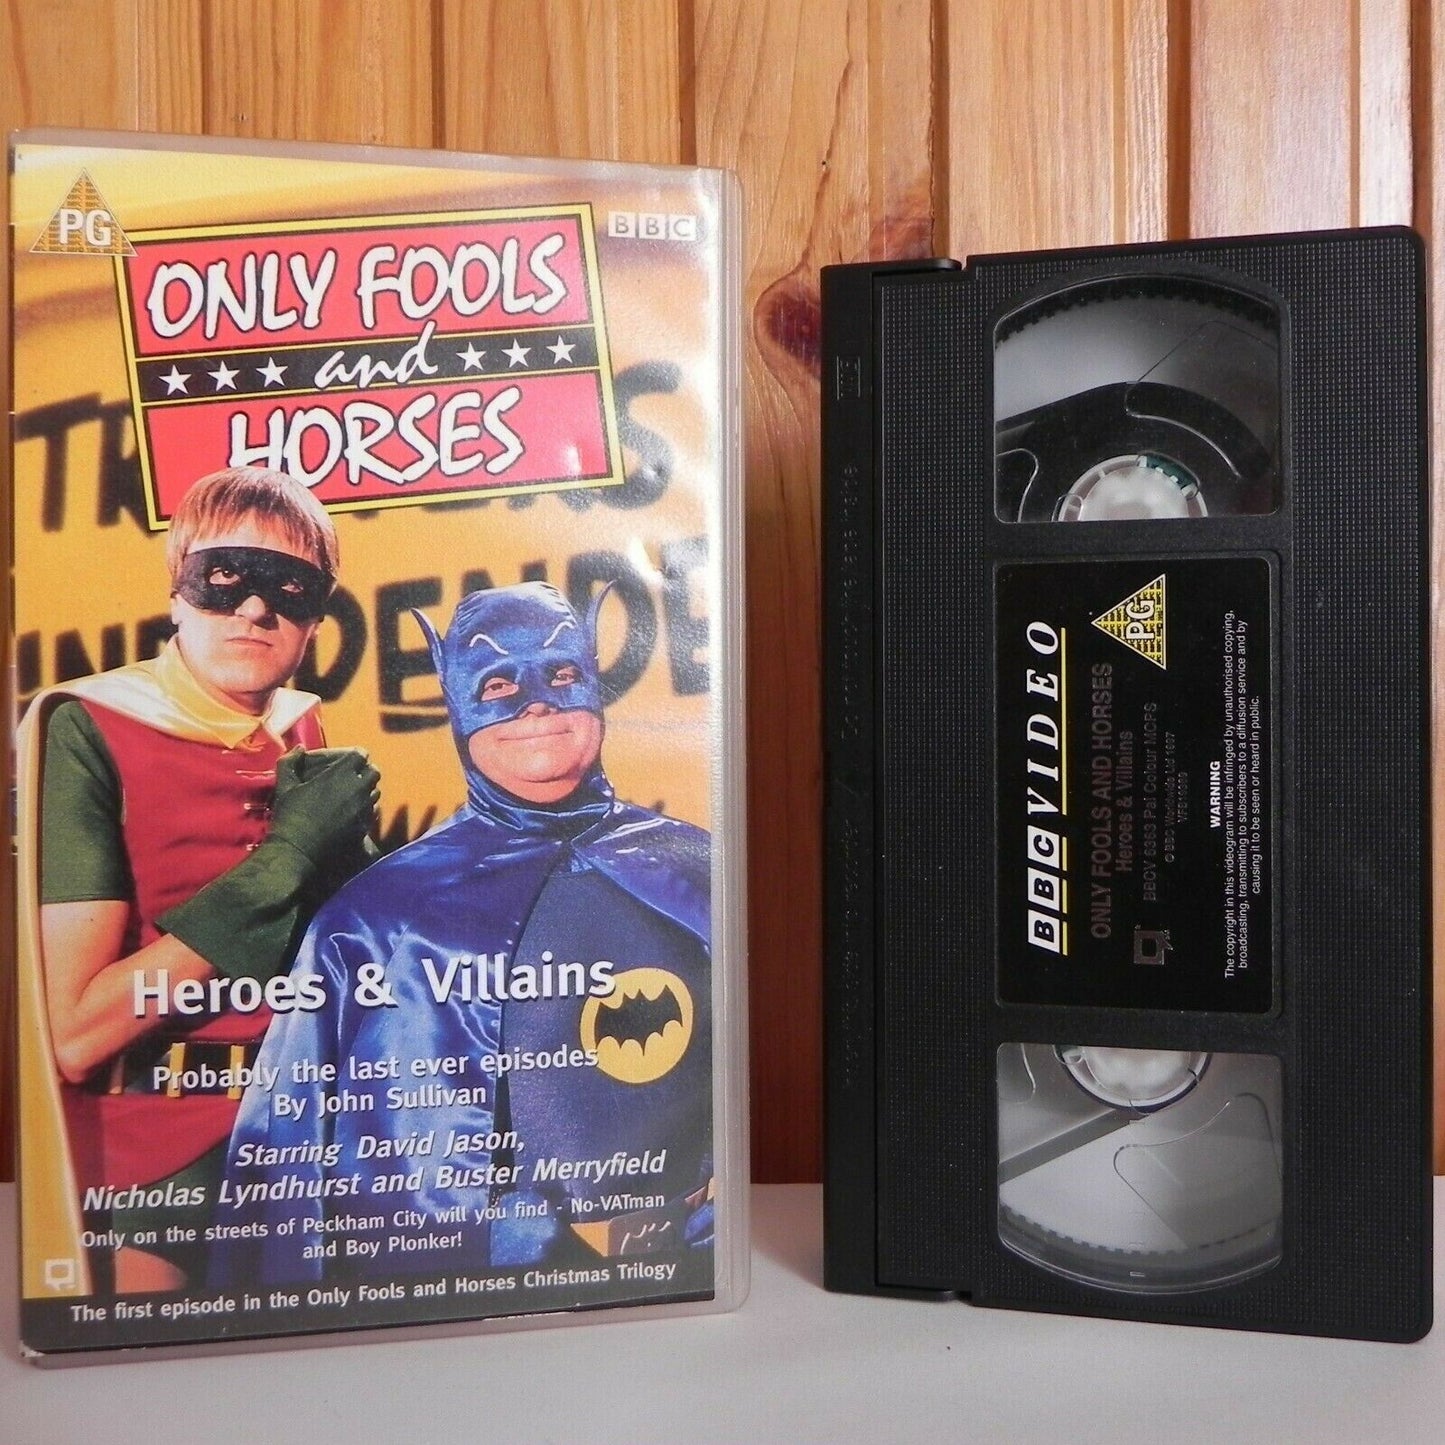 Only Fools And Horses - Heroes And Villians - BBC - Comedy - TV Show - Pal VHS-